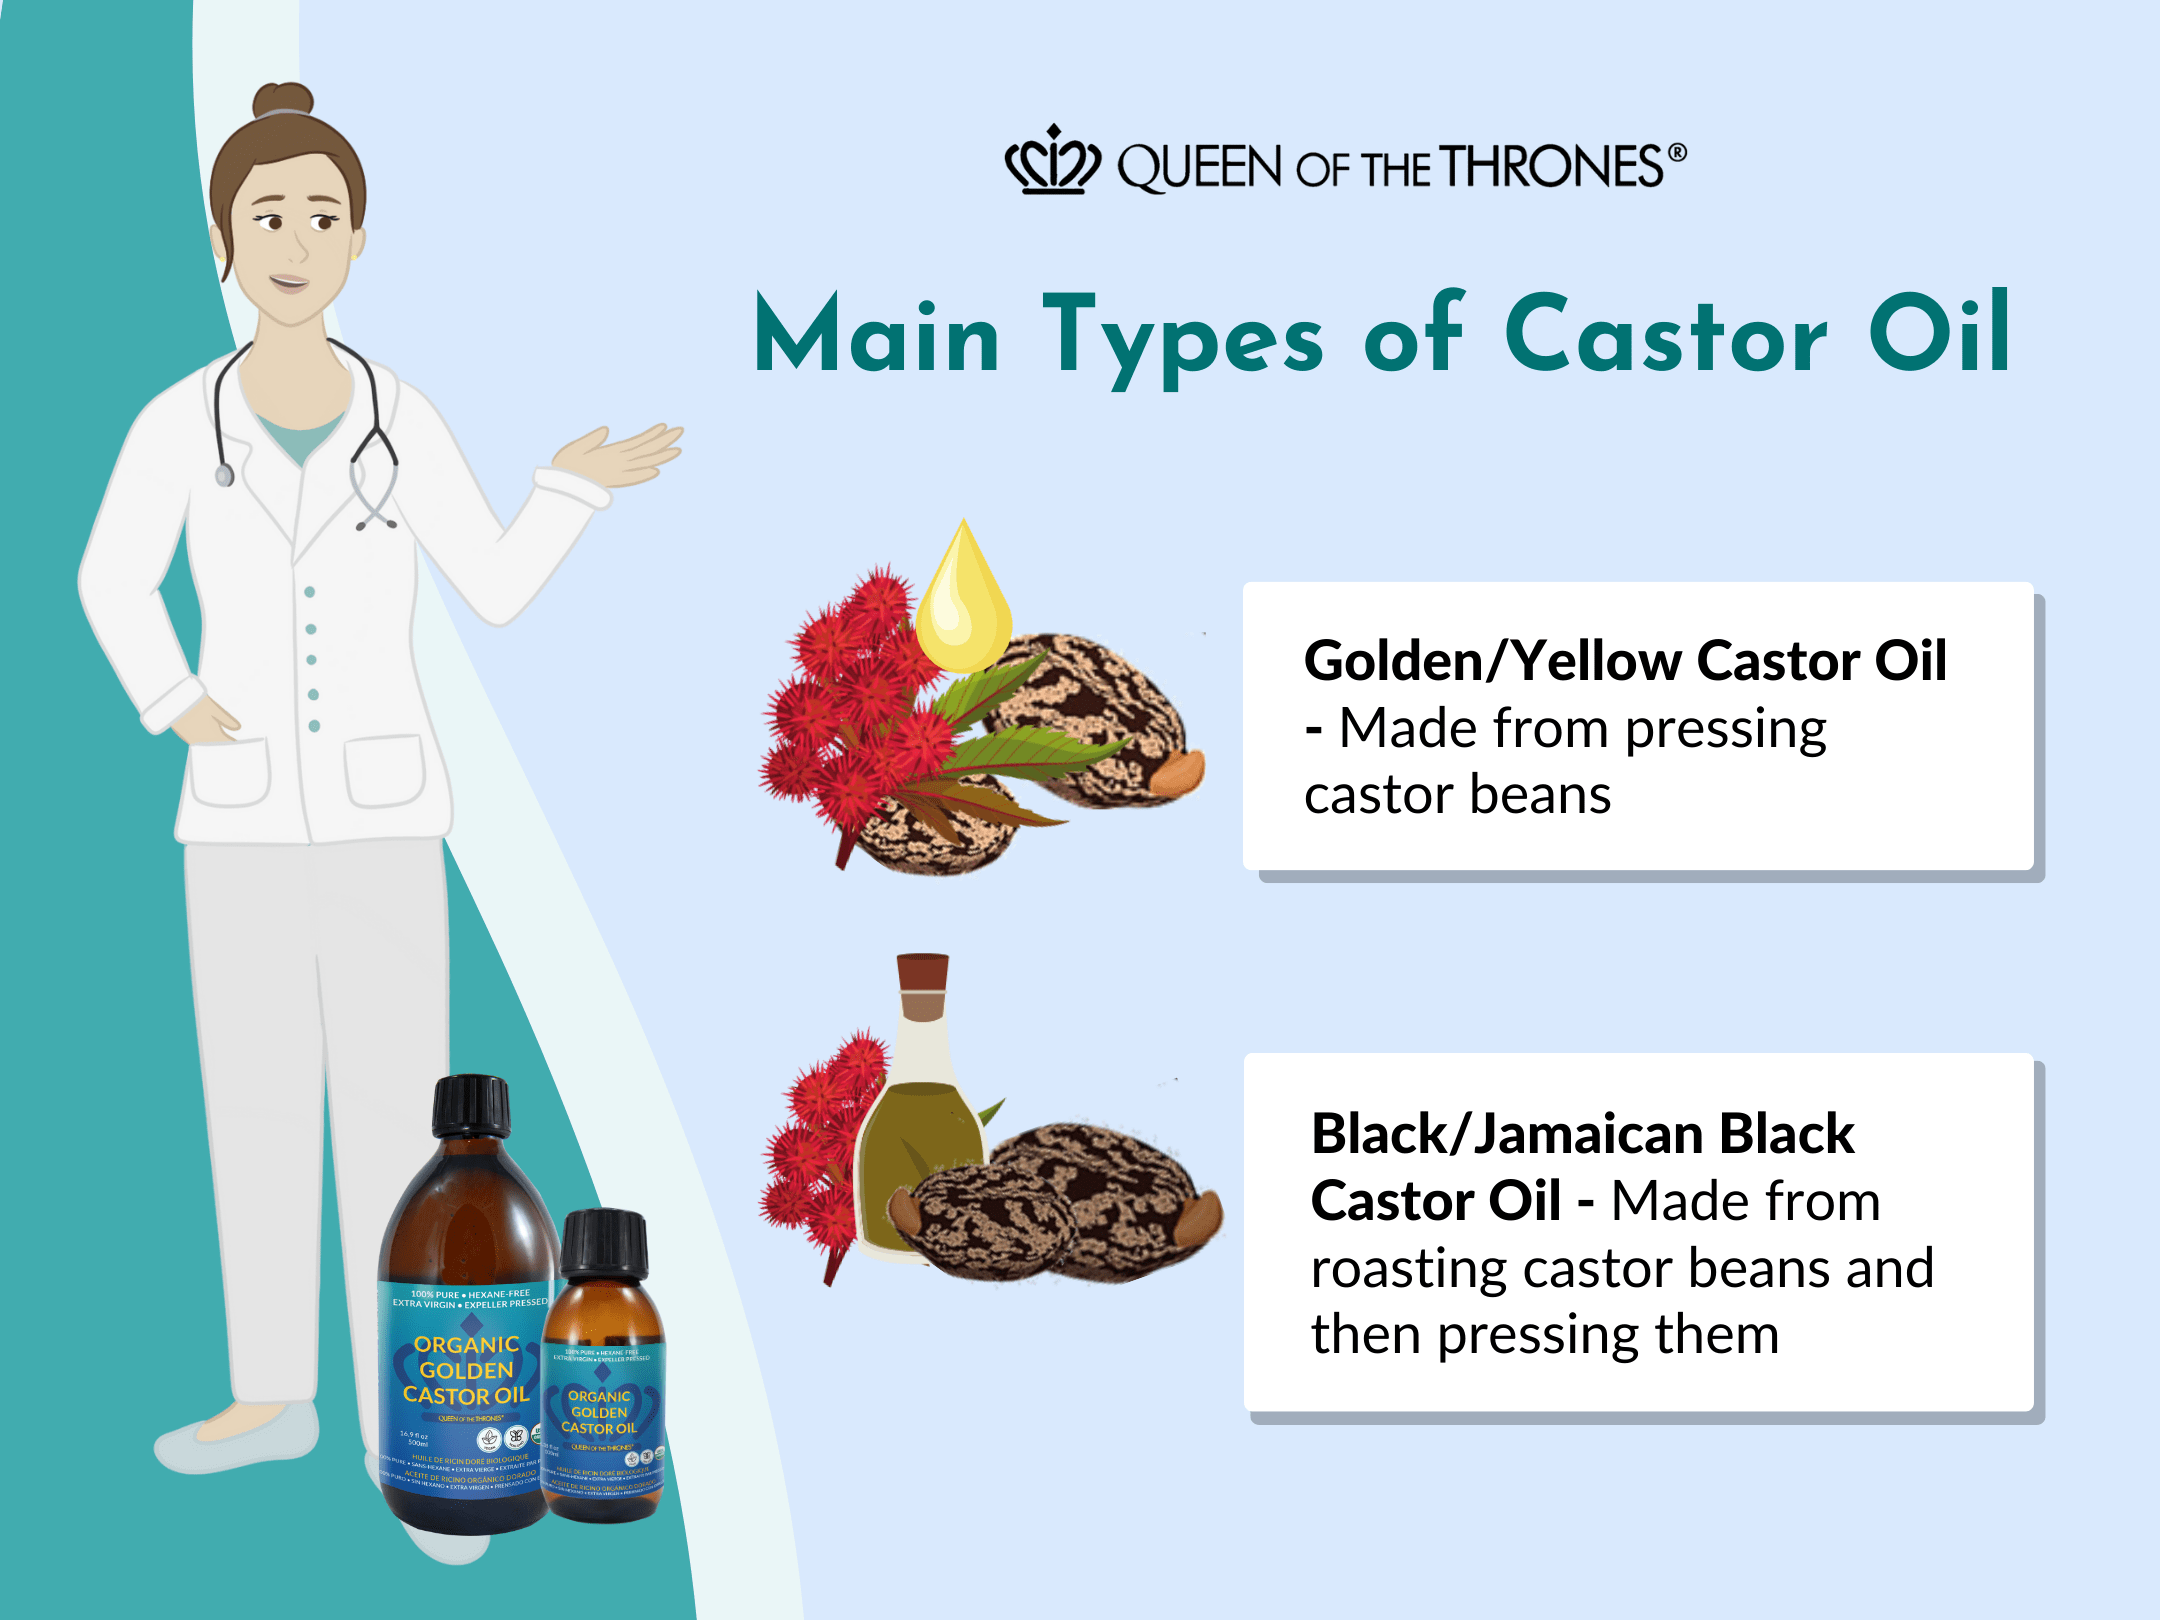 Main types of Castor Oil by Queen of the Thrones